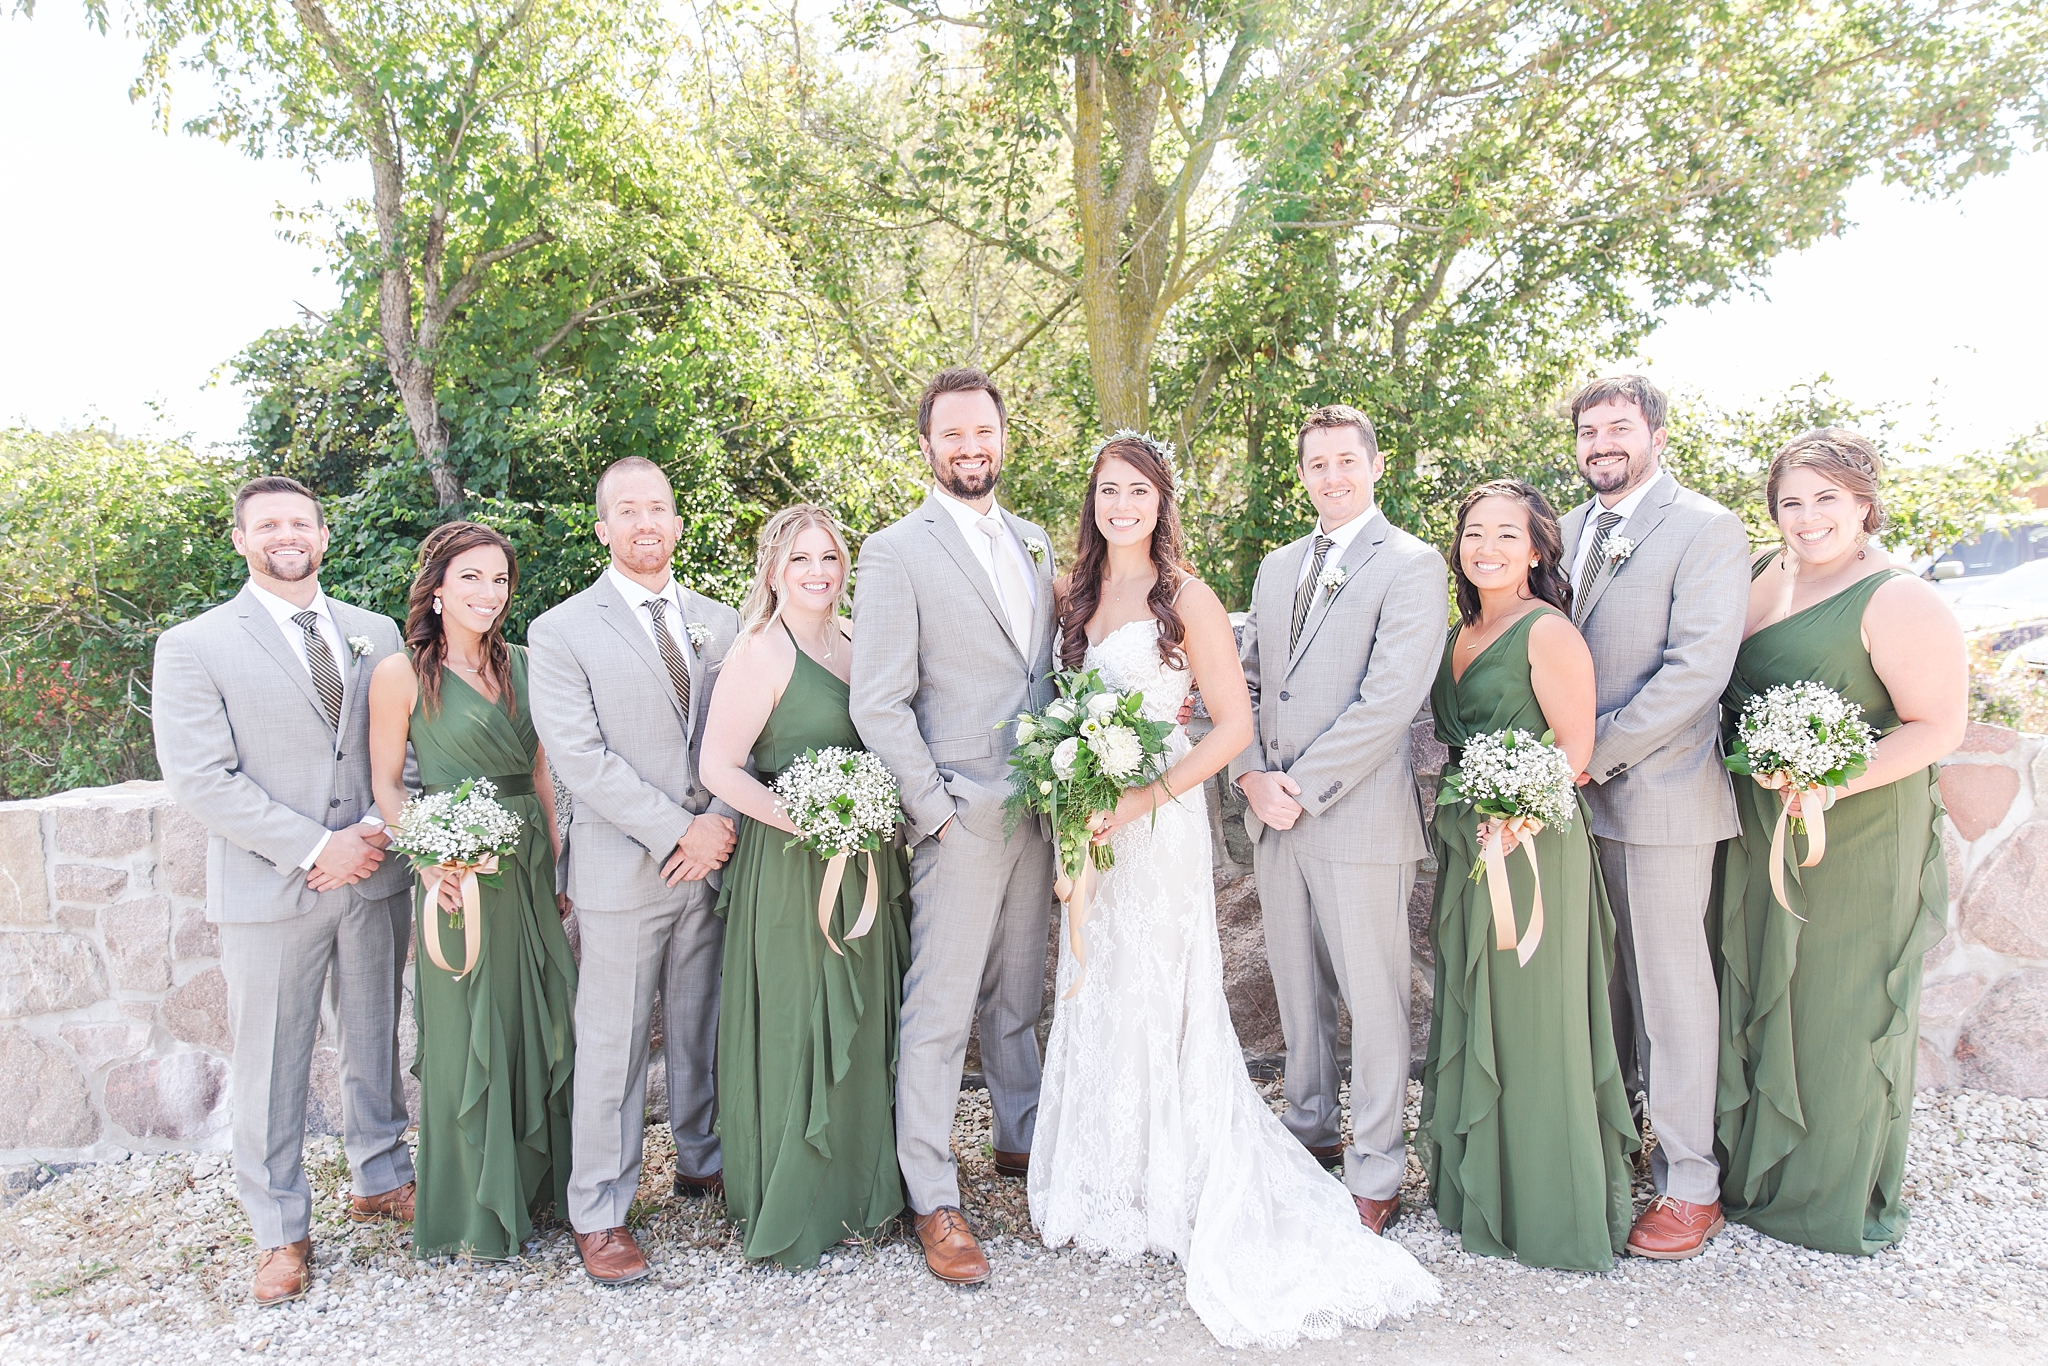 natural-rustic-wedding-photos-at-frutig-farms-the-valley-in-ann-arbor-michigan-by-courtney-carolyn-photography_0028.jpg